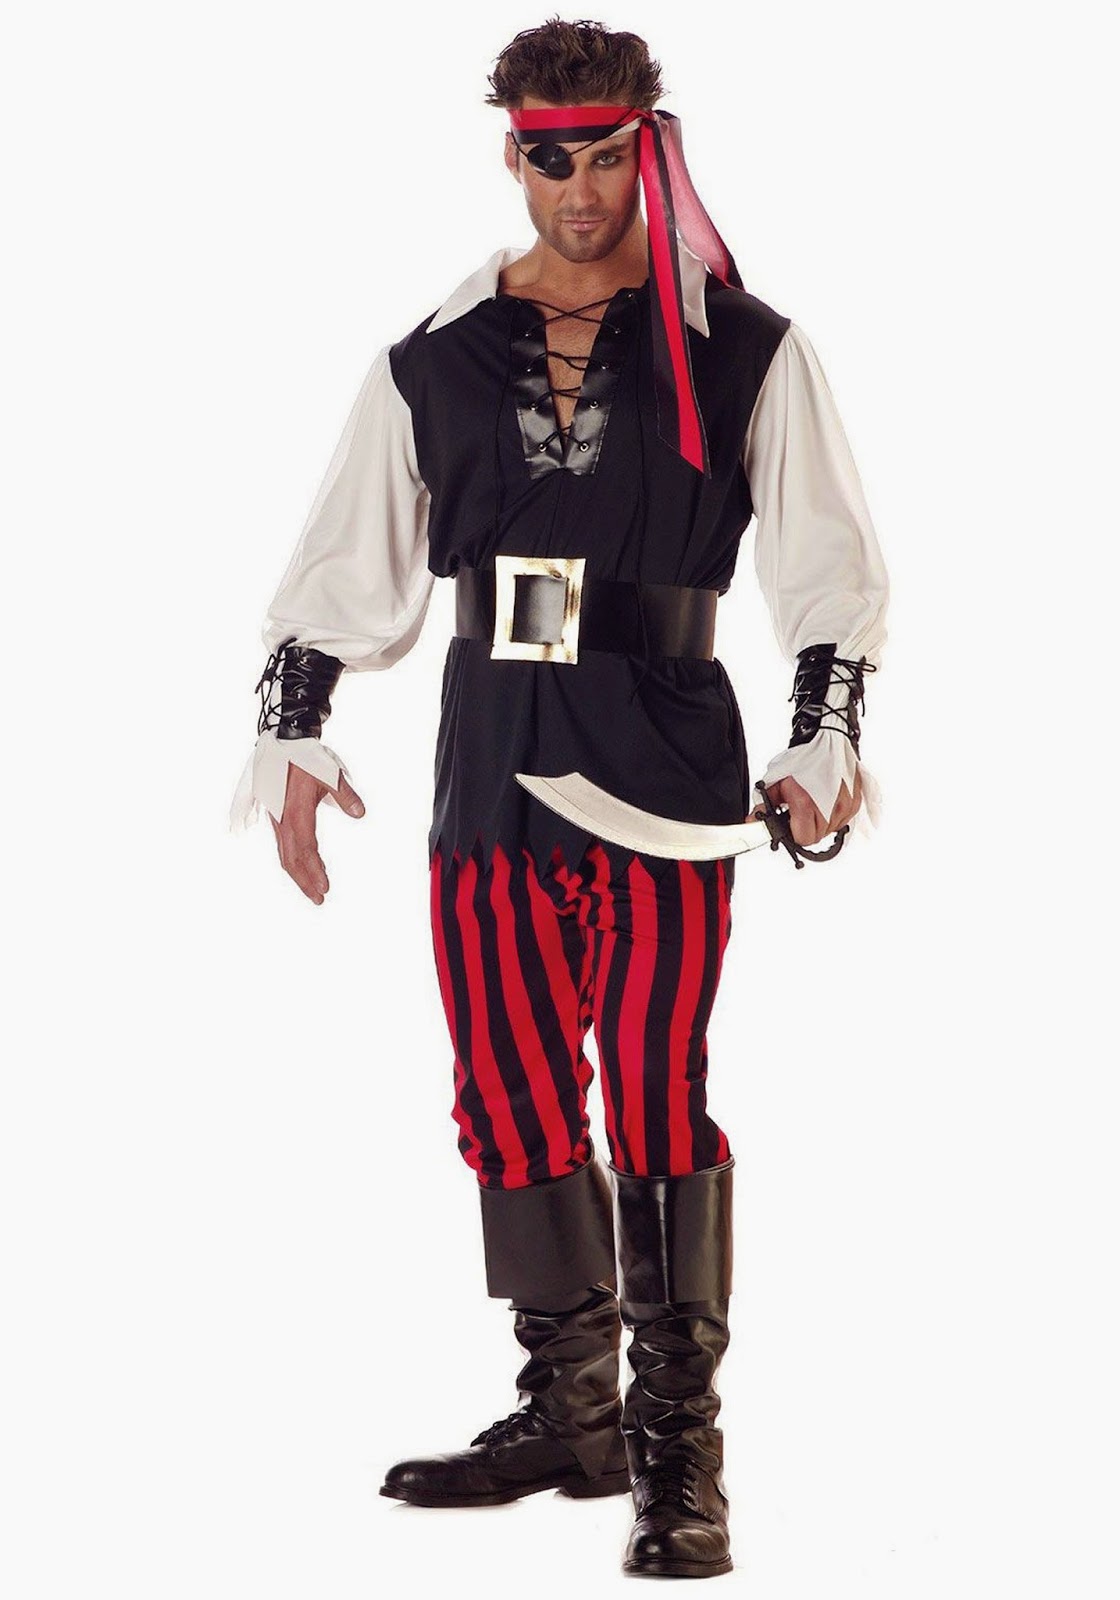 20 Photo of Pirate Cosplay Designs for Men - Creative Cosplay Designs